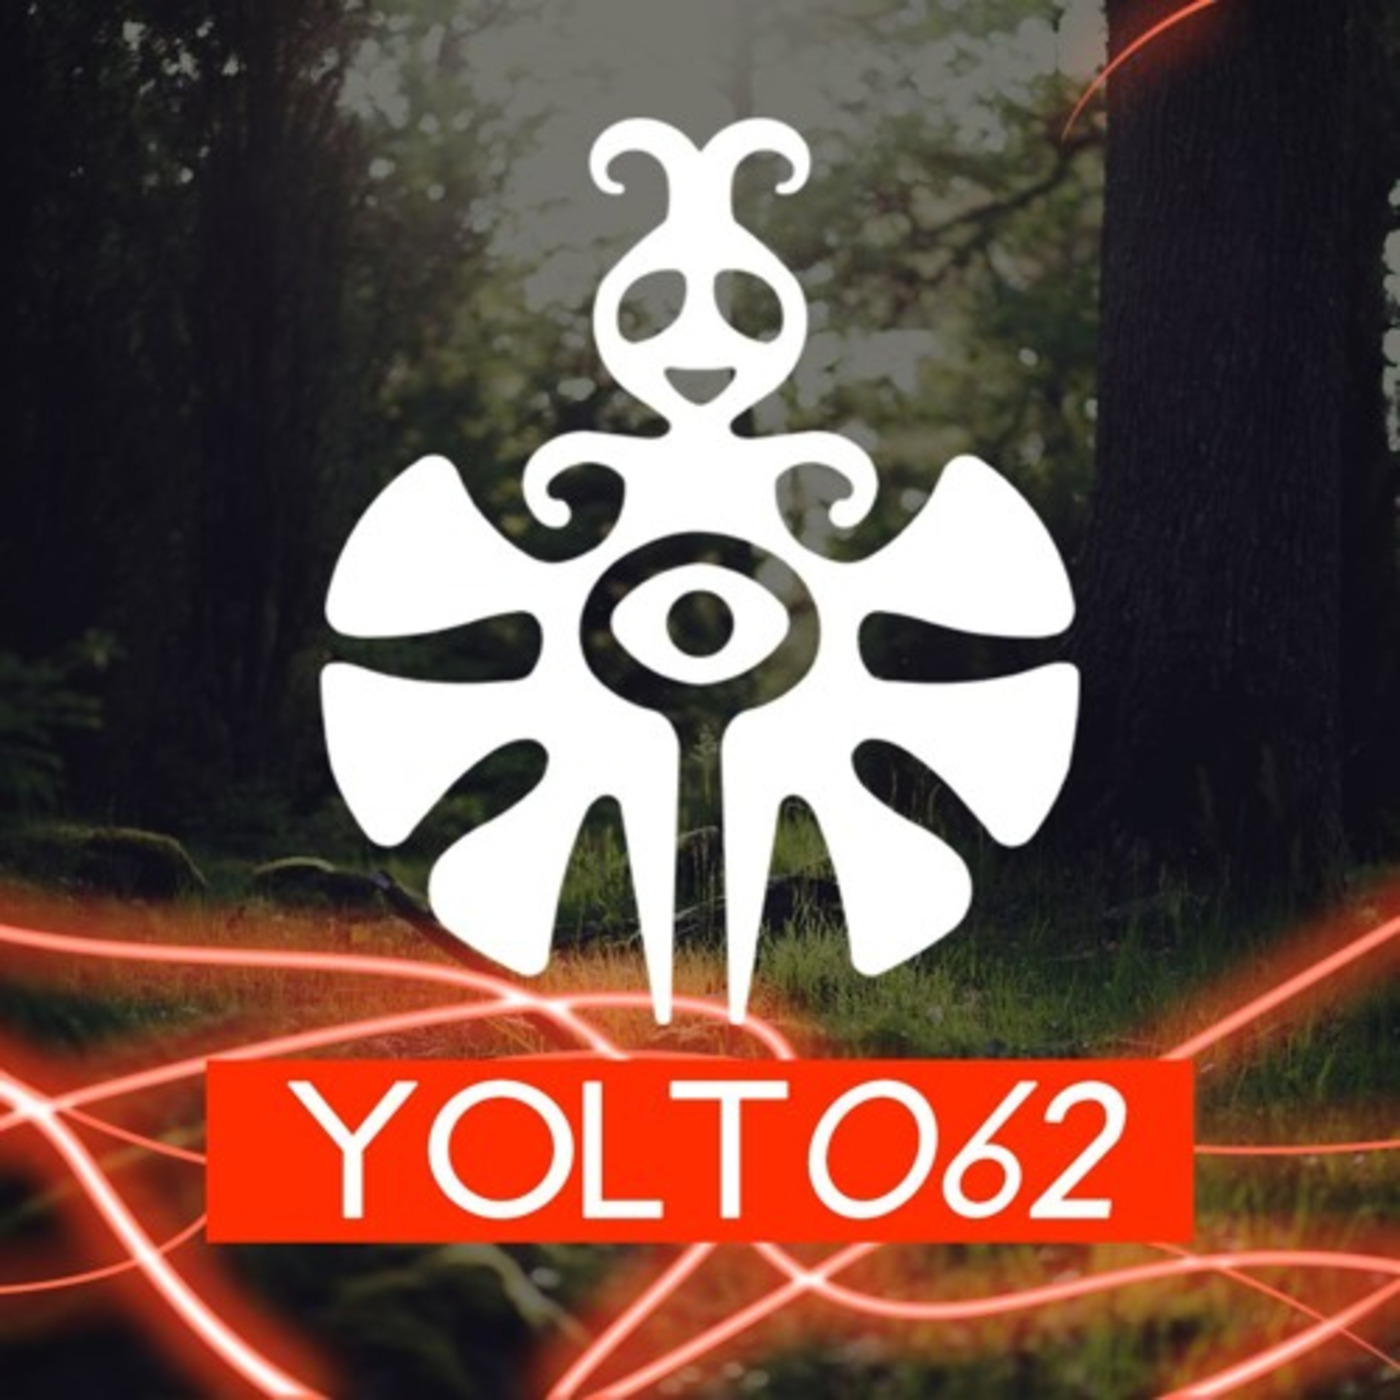 You Only Live Trance Episode 062 (#YOLT062) - Ness